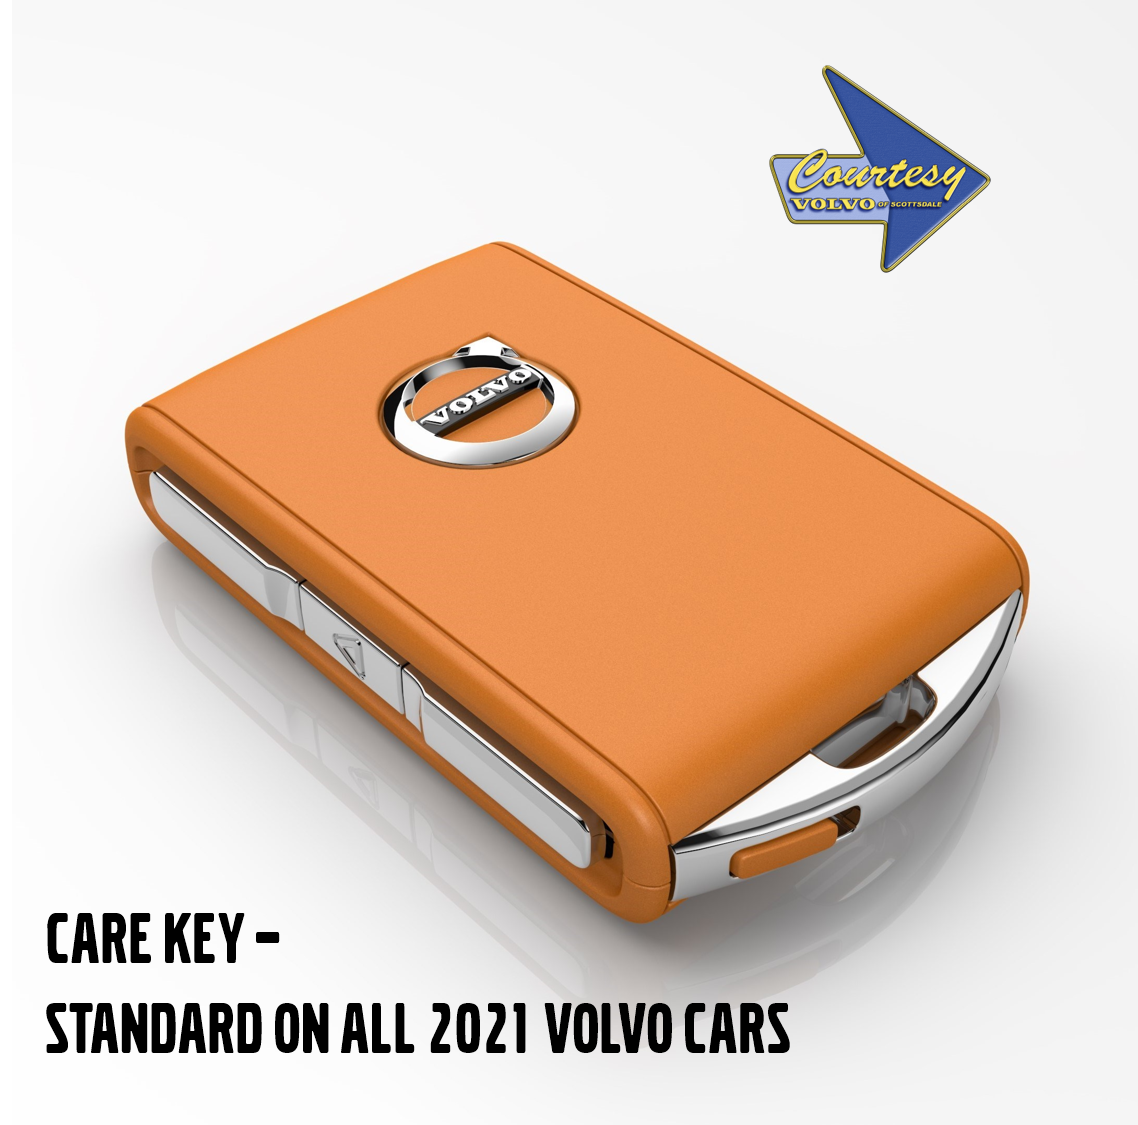 Set Speed limitations on your vehicle with Volvo's standard Care Key